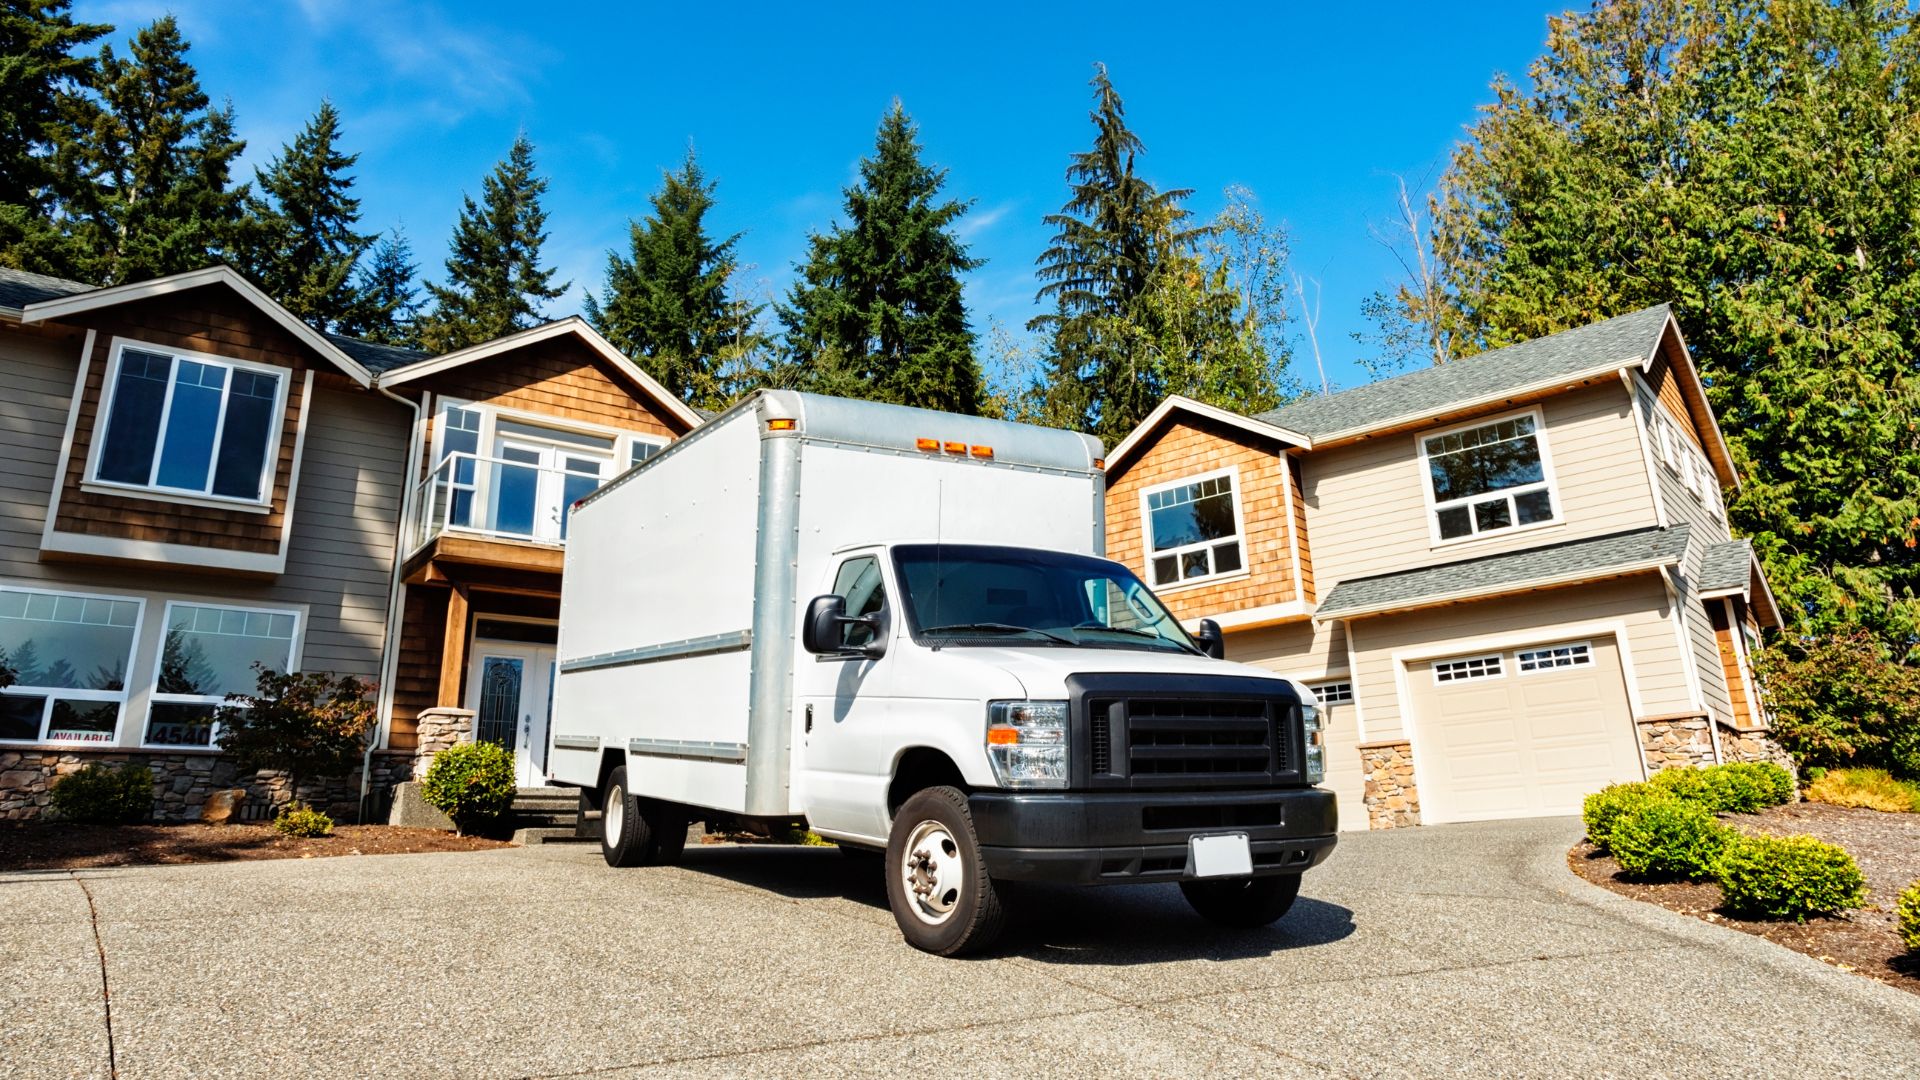 Stress-Free Moving: How To Find A Reliable Moving Company Customers Can Trust